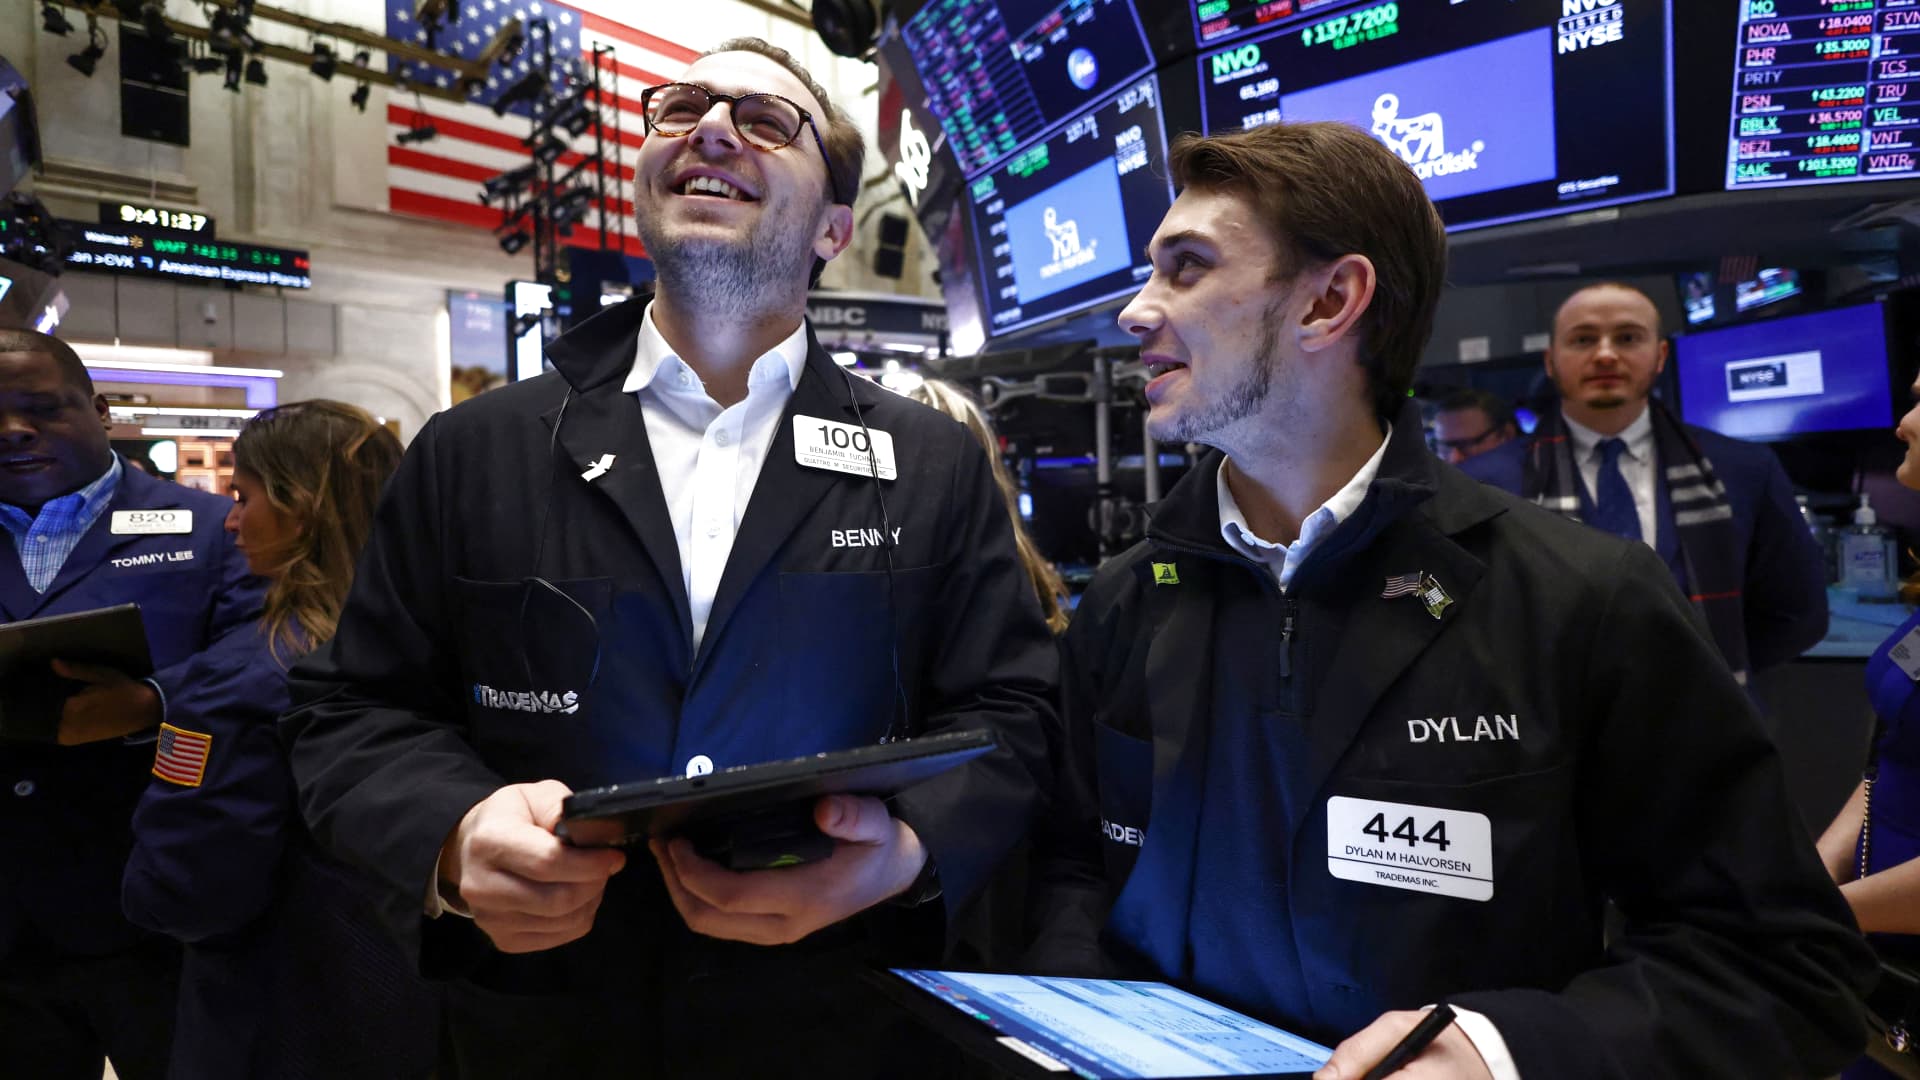 S&P 500 gains on Tuesday as it heads for best January since 2019 - CNBC